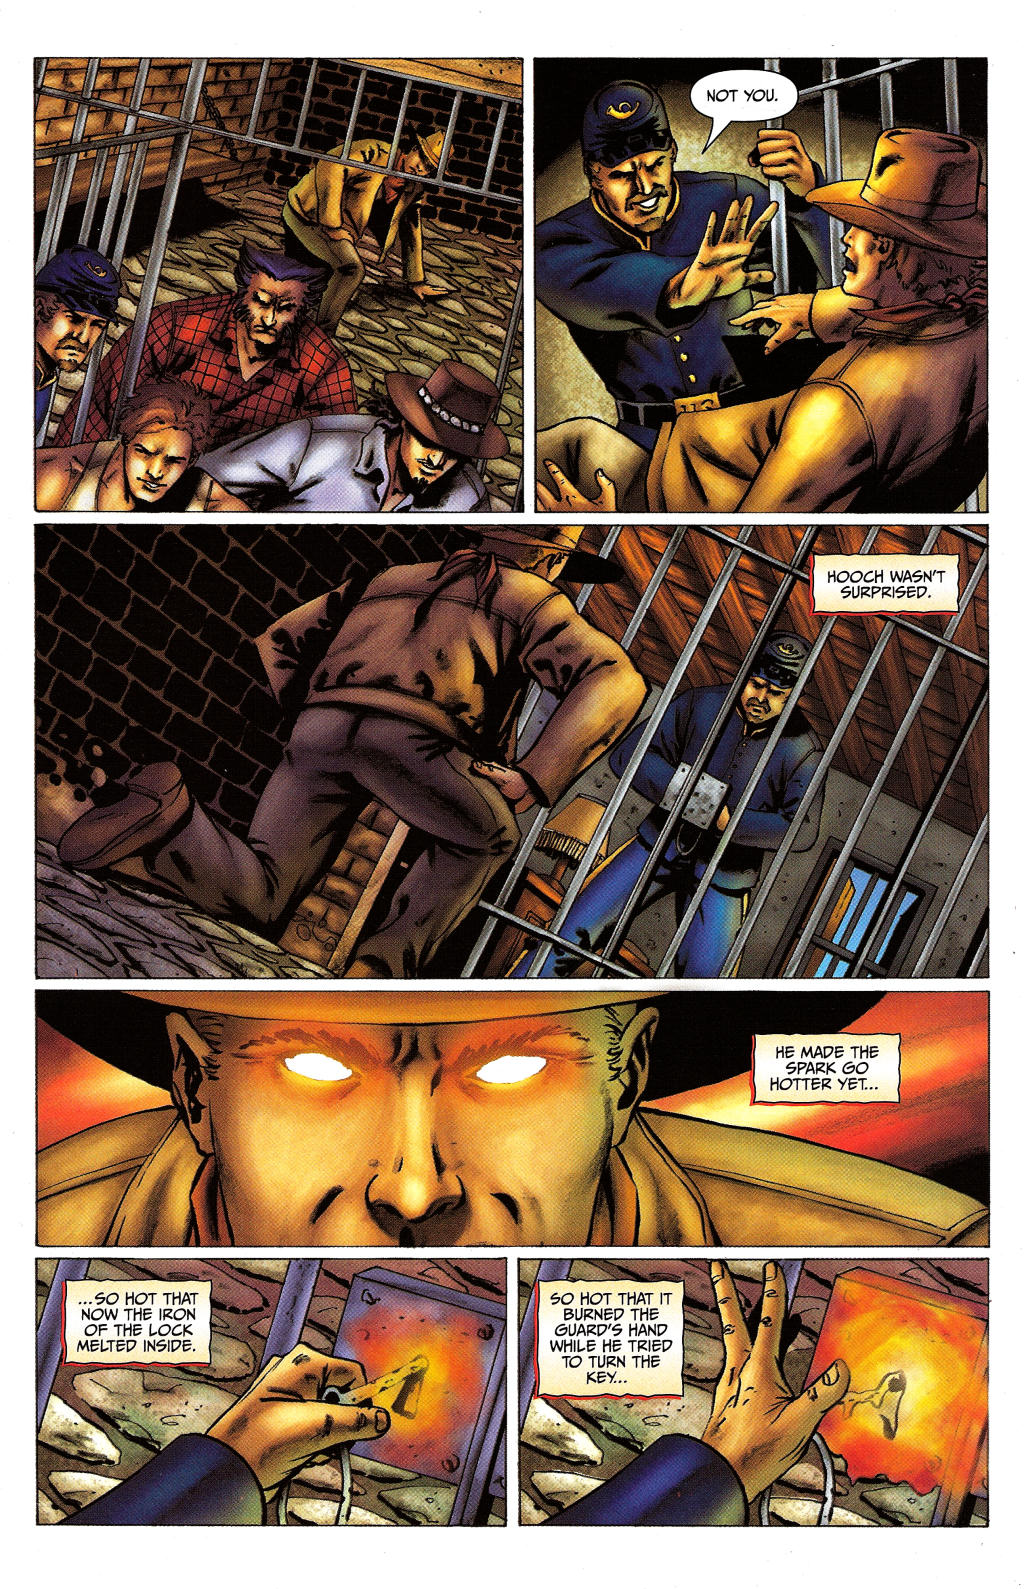 Red Prophet: The Tales of Alvin Maker issue 4 - Page 19